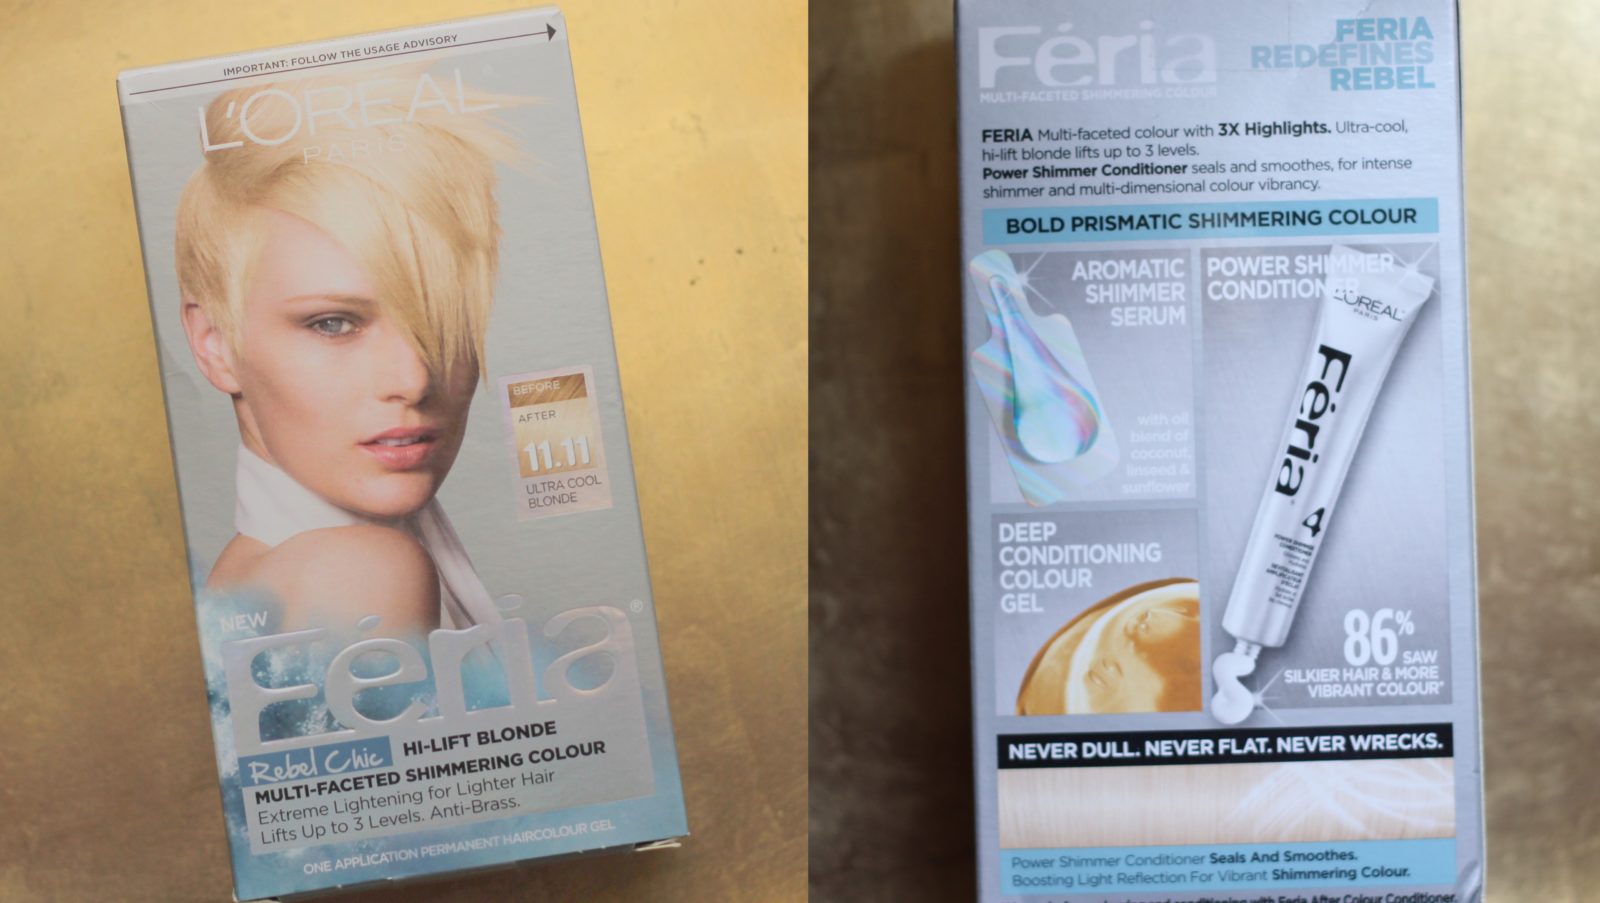 Review with Before and After Photos: Feria Rebel Chic Hi-Lift Blonde – Shade 11.11 Icy Blonde